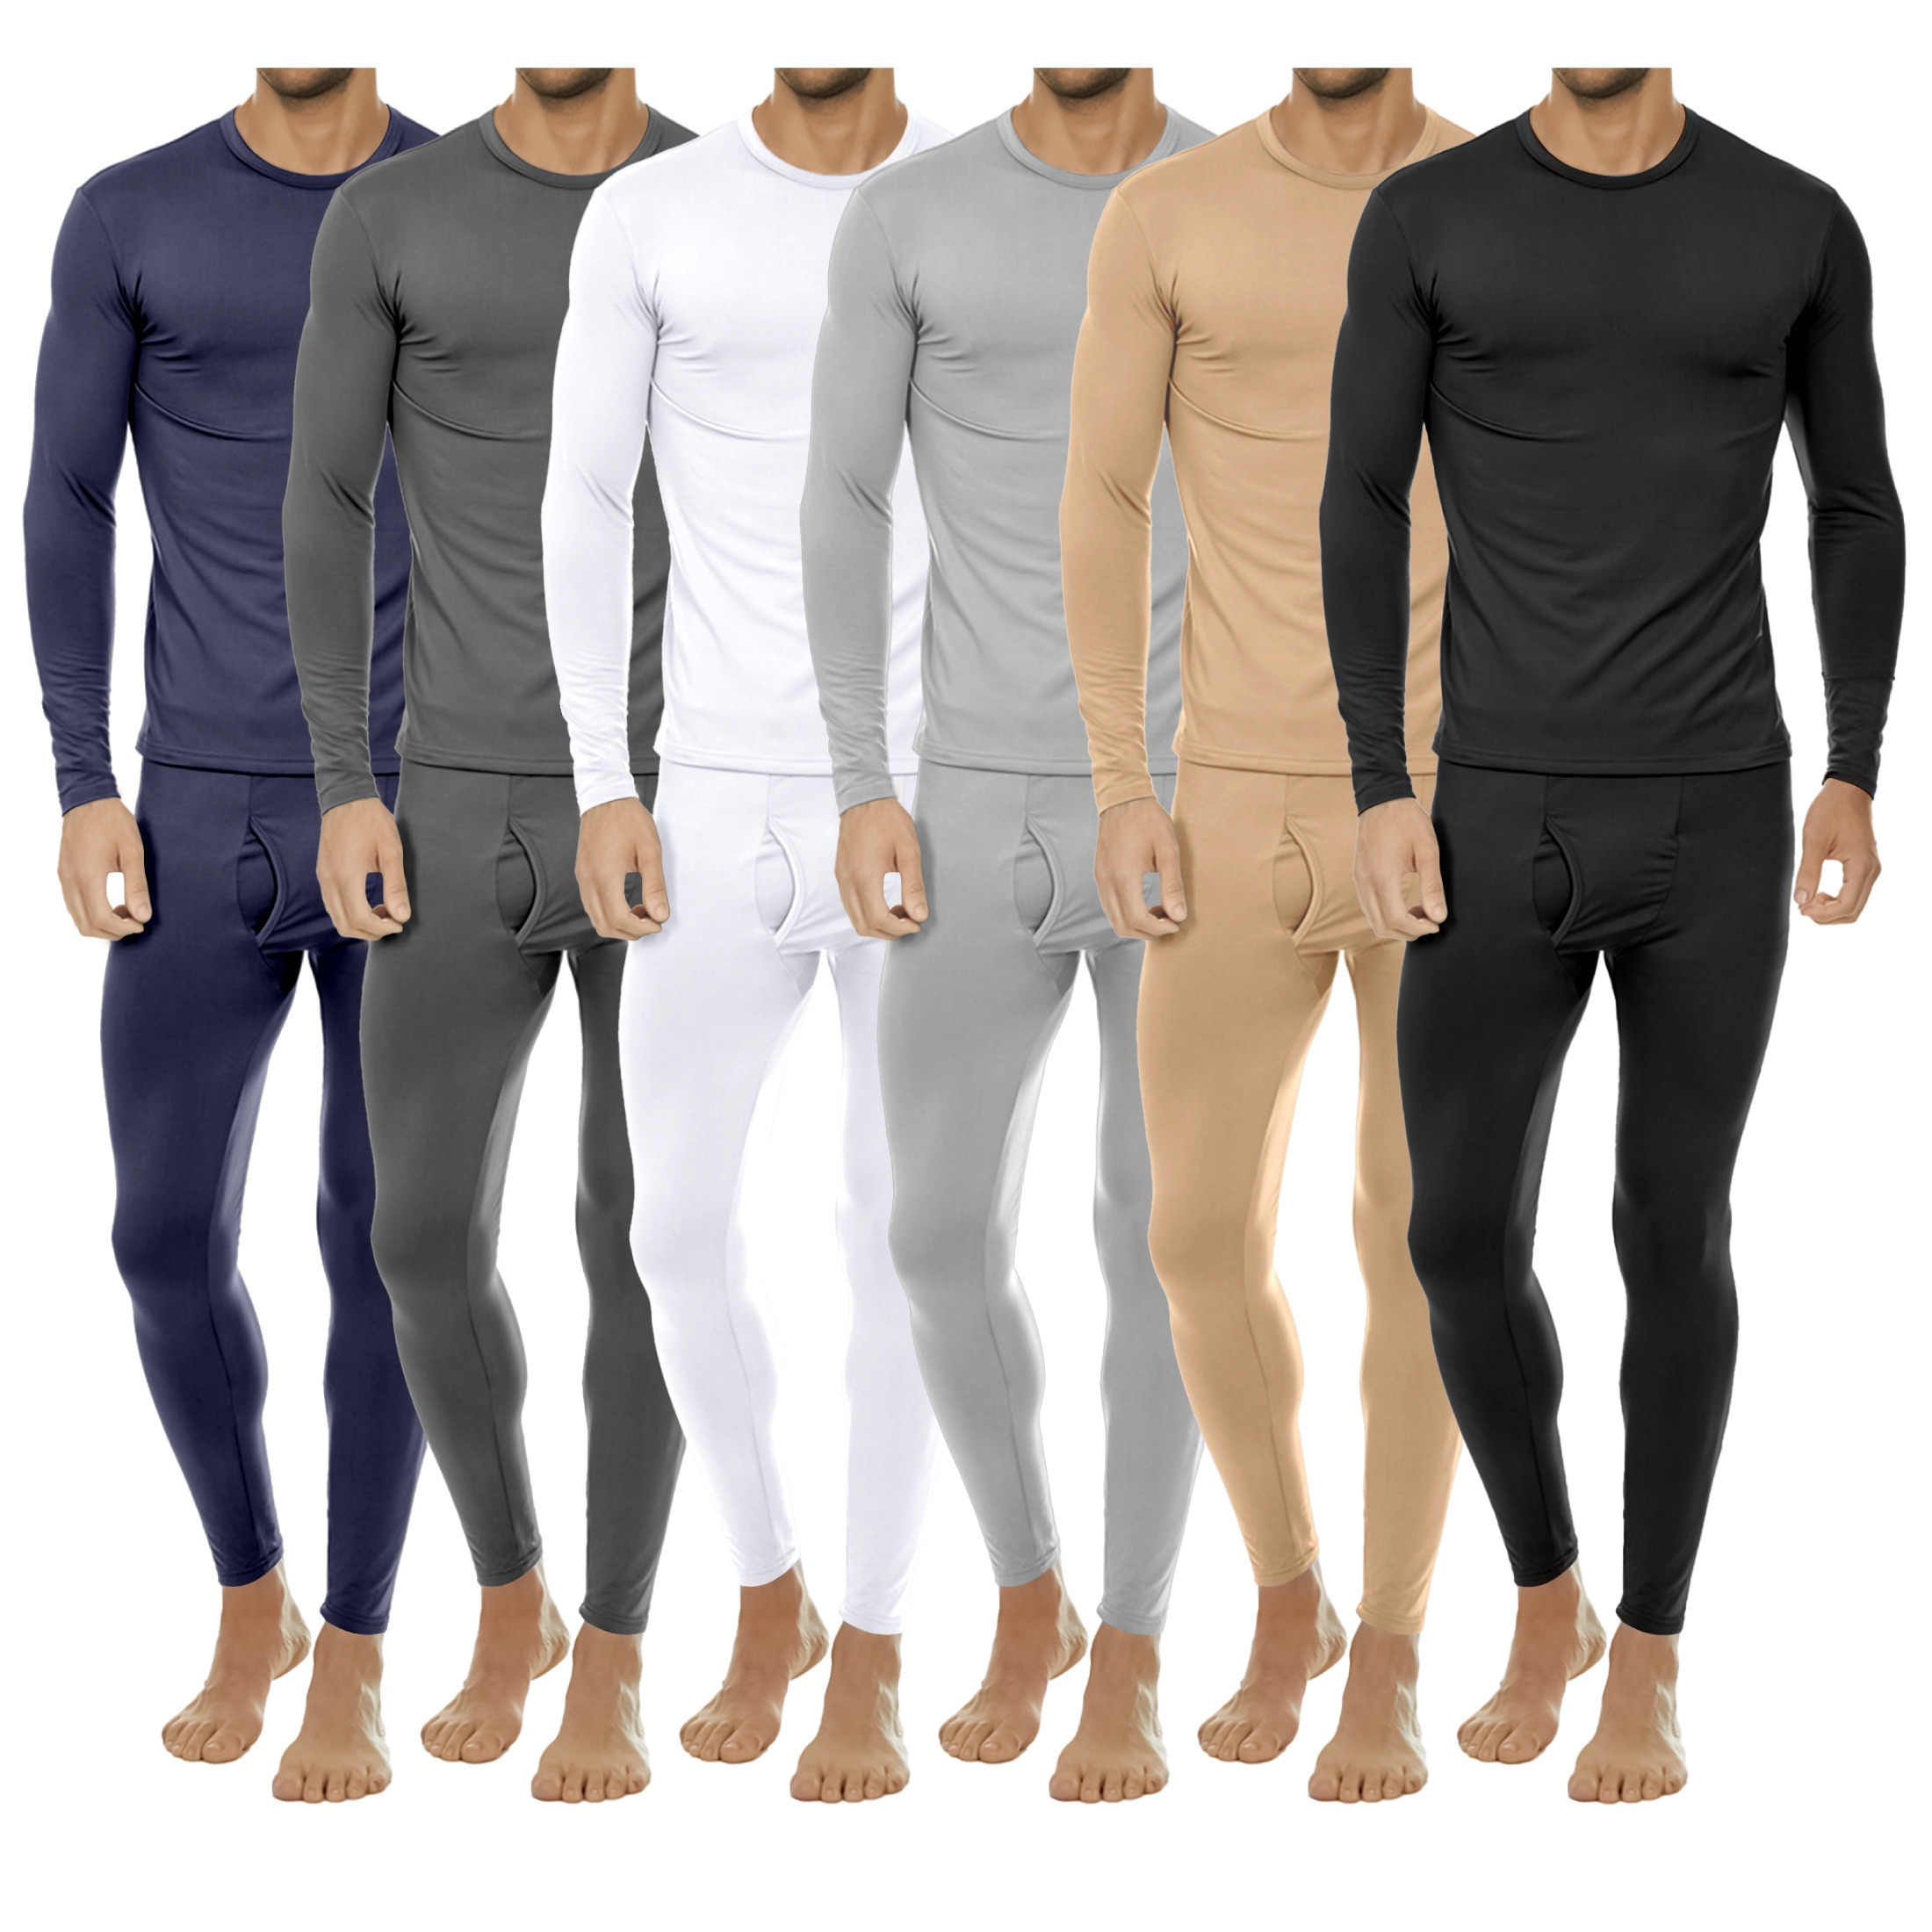 4-Piece: Men's Fleece Lined Thermal Set For Cold Weather - 2X-Large